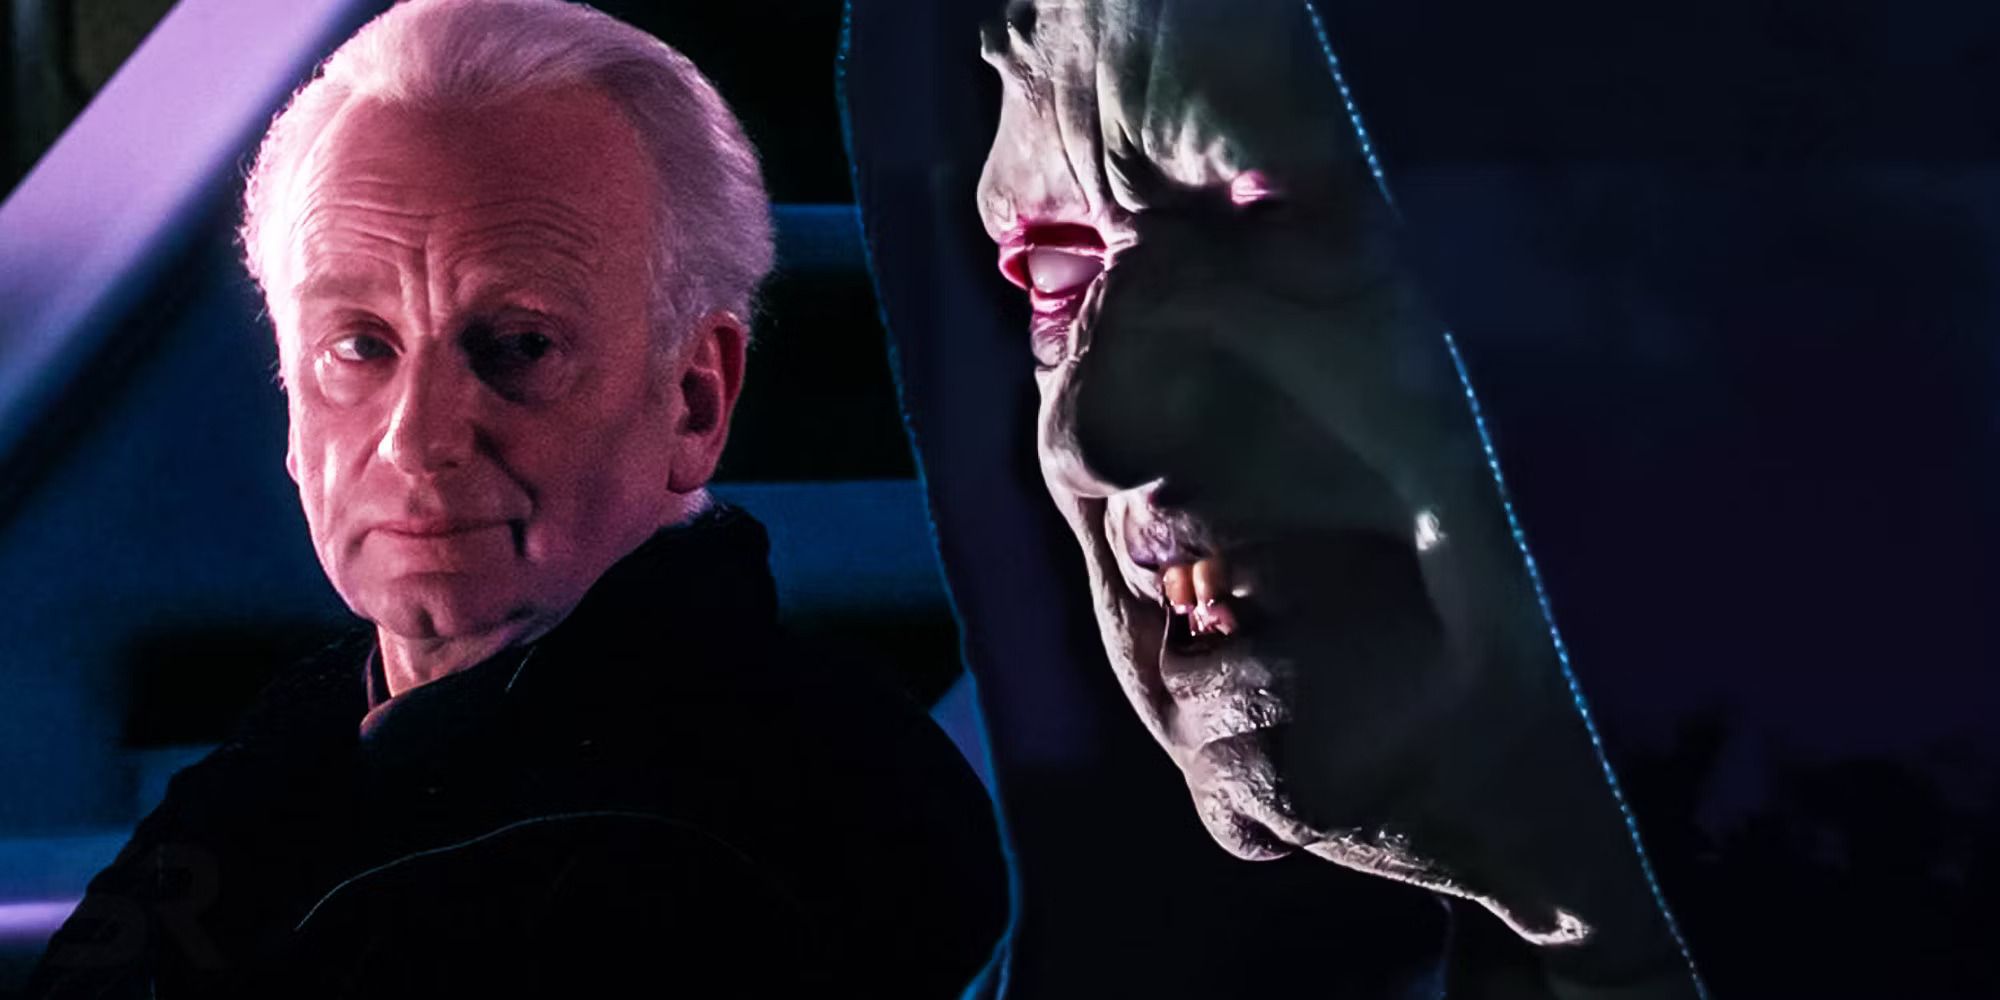 Chancellor Palpatine in Star Wars: Episode III - Revenge of the Sith and Emperor Palpatine in Star Wars: The Rise of Skywalker.